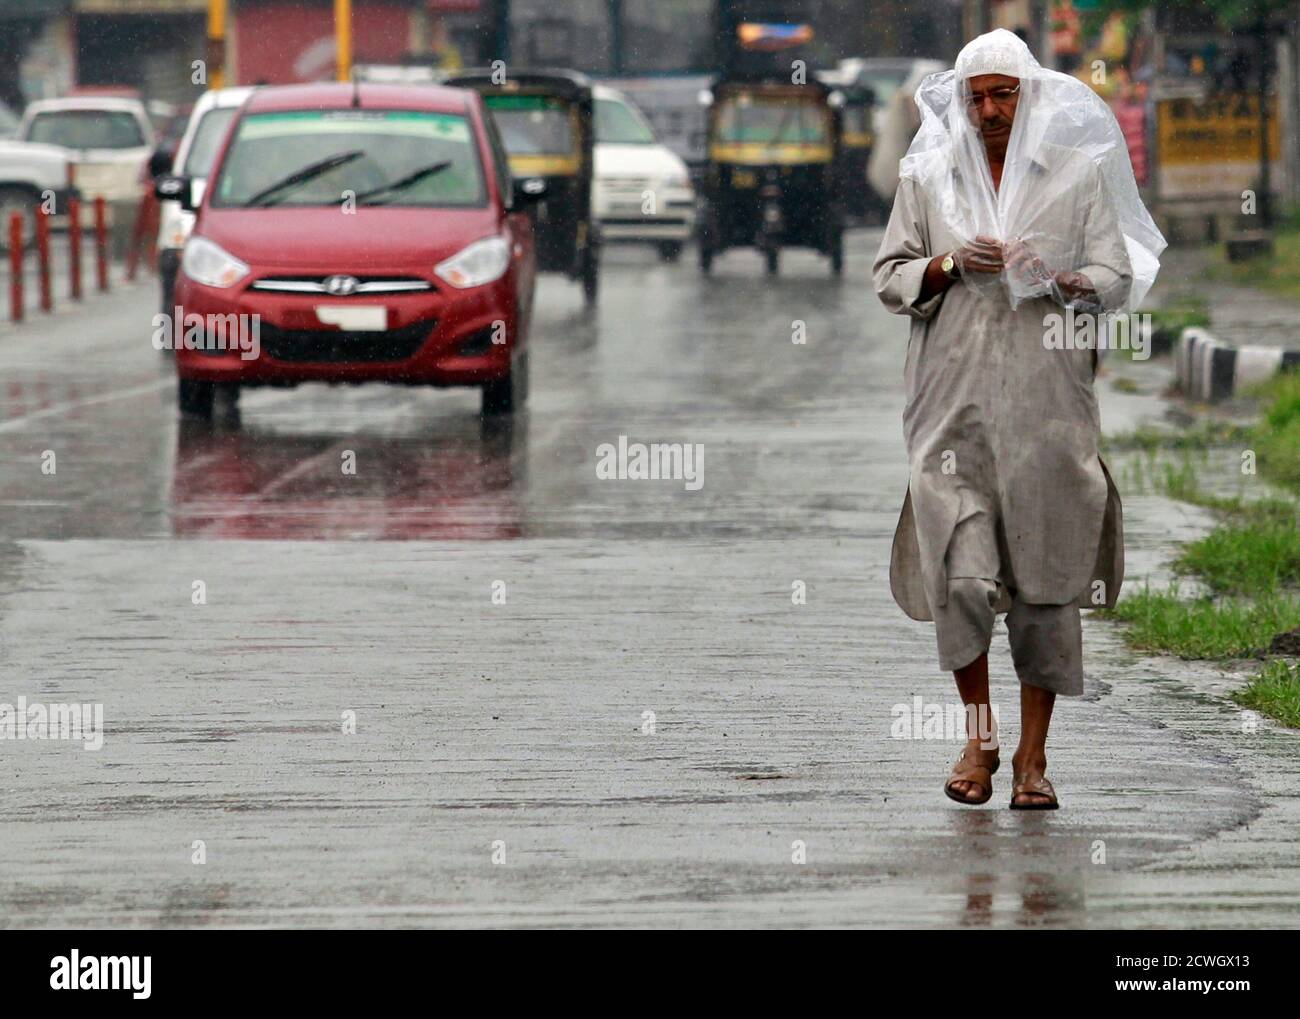 A man covers himself with a polythene sheet as it rains in Srinagar August  4, 2012. A moderate rainfall in Srinagar since Friday evening brought down  temperatures from 34 degrees Celsius (93